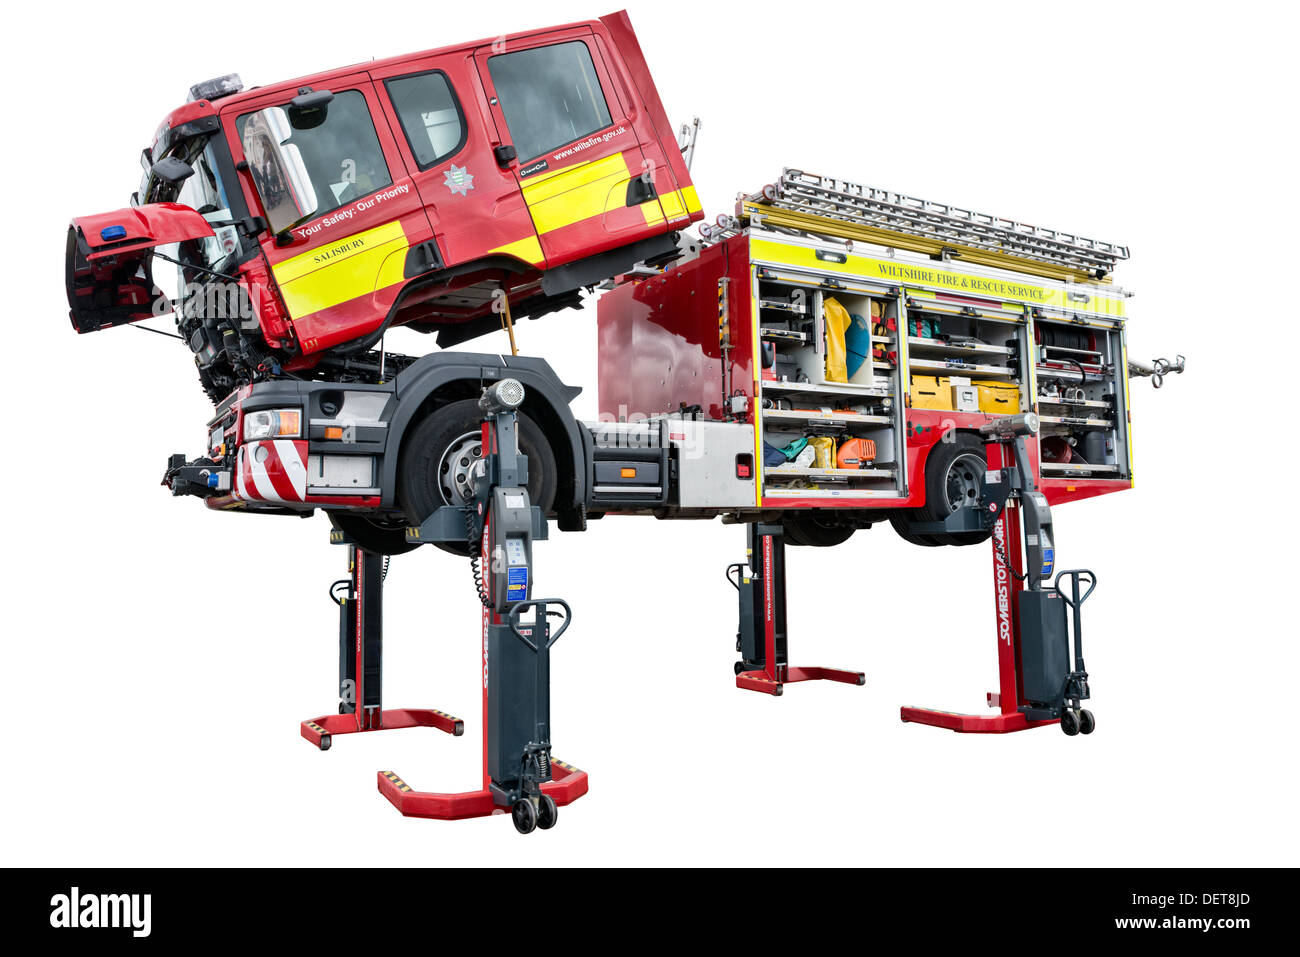 A cut out of a Scania fire engine hoisted aloft for inspection showing aspects of its emergency equipment Stock Photo